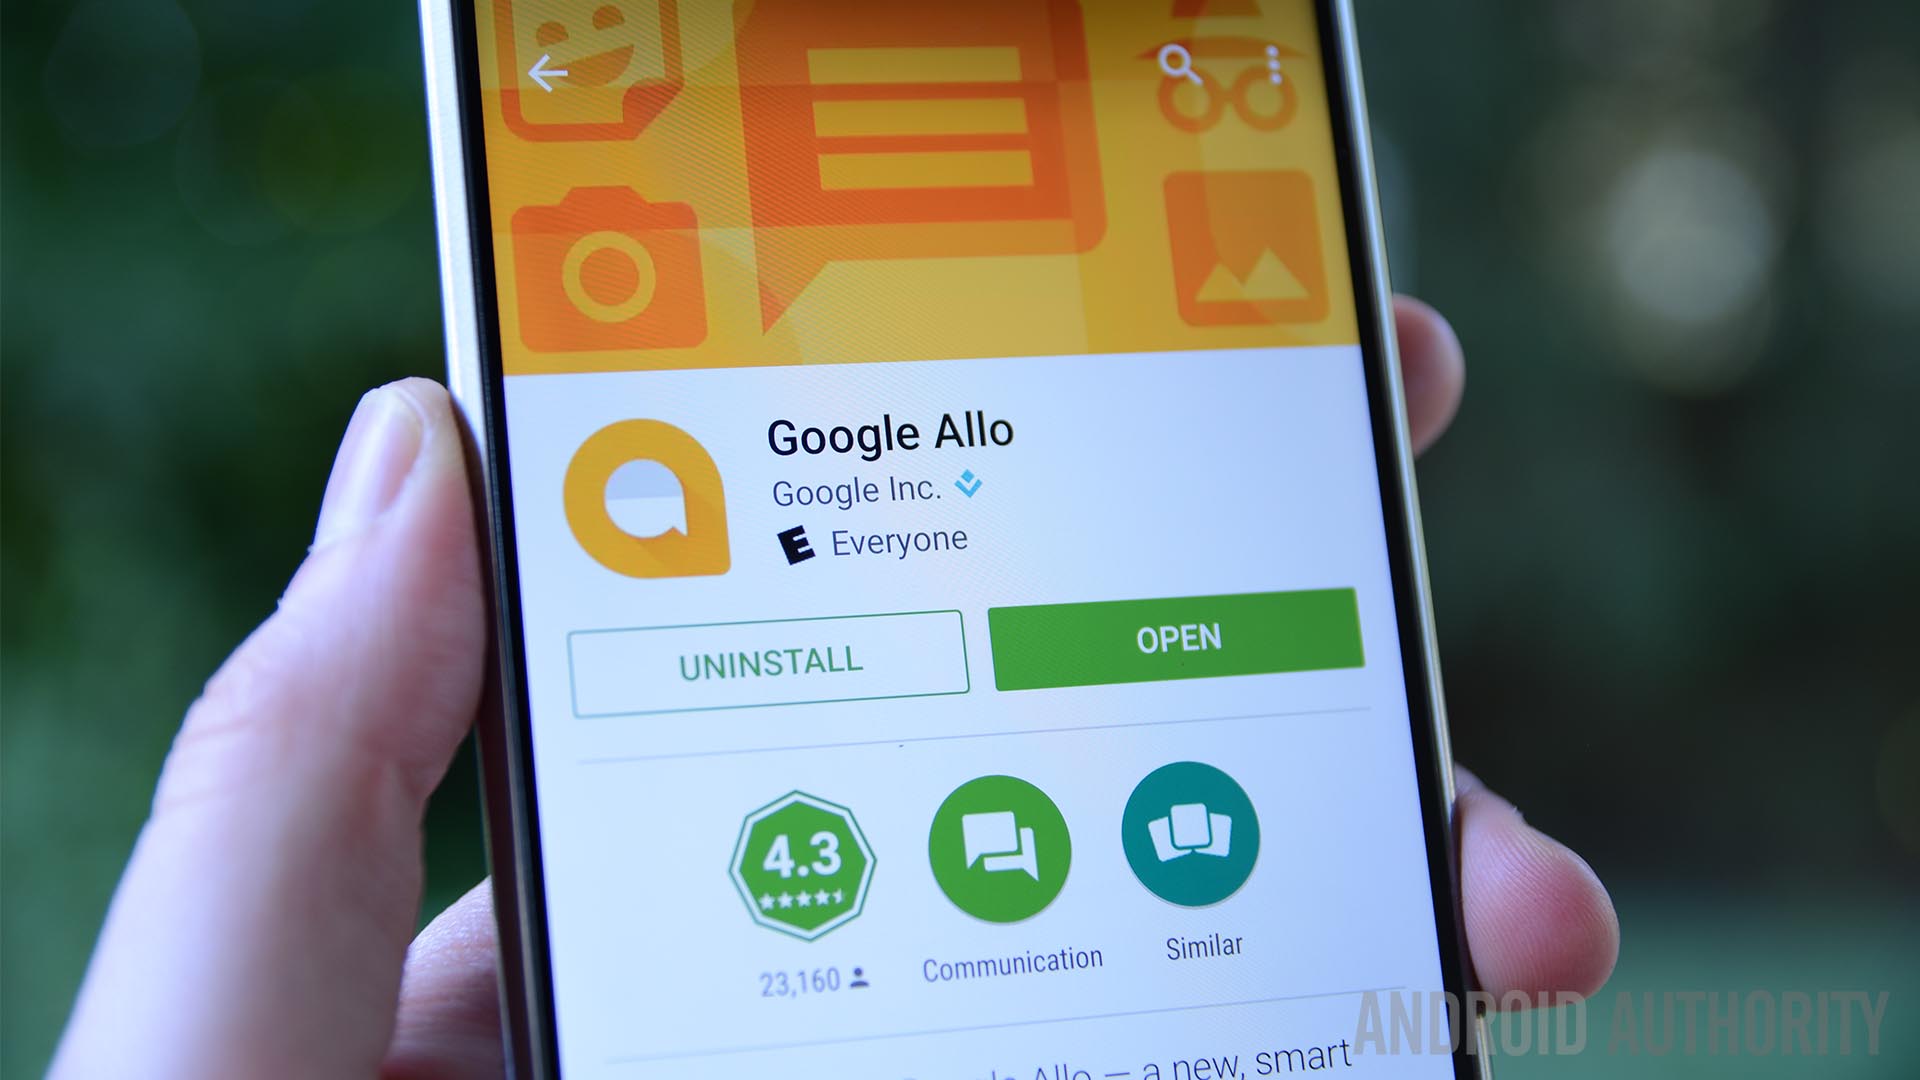 Google Allo photograph from the Play Store